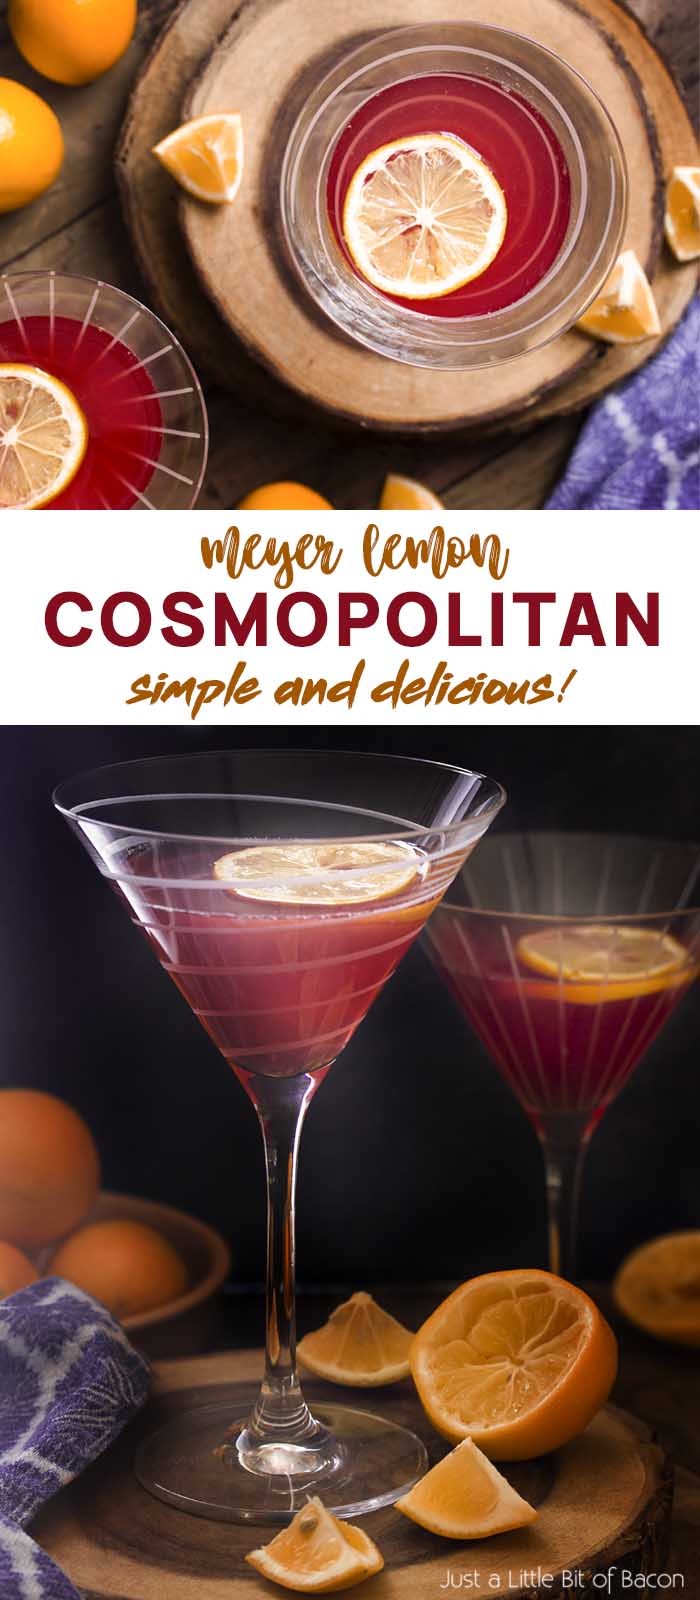 Two views of martini glasses filled with a cocktail and text overlay - Meyer Lemon Cosmopolitan.